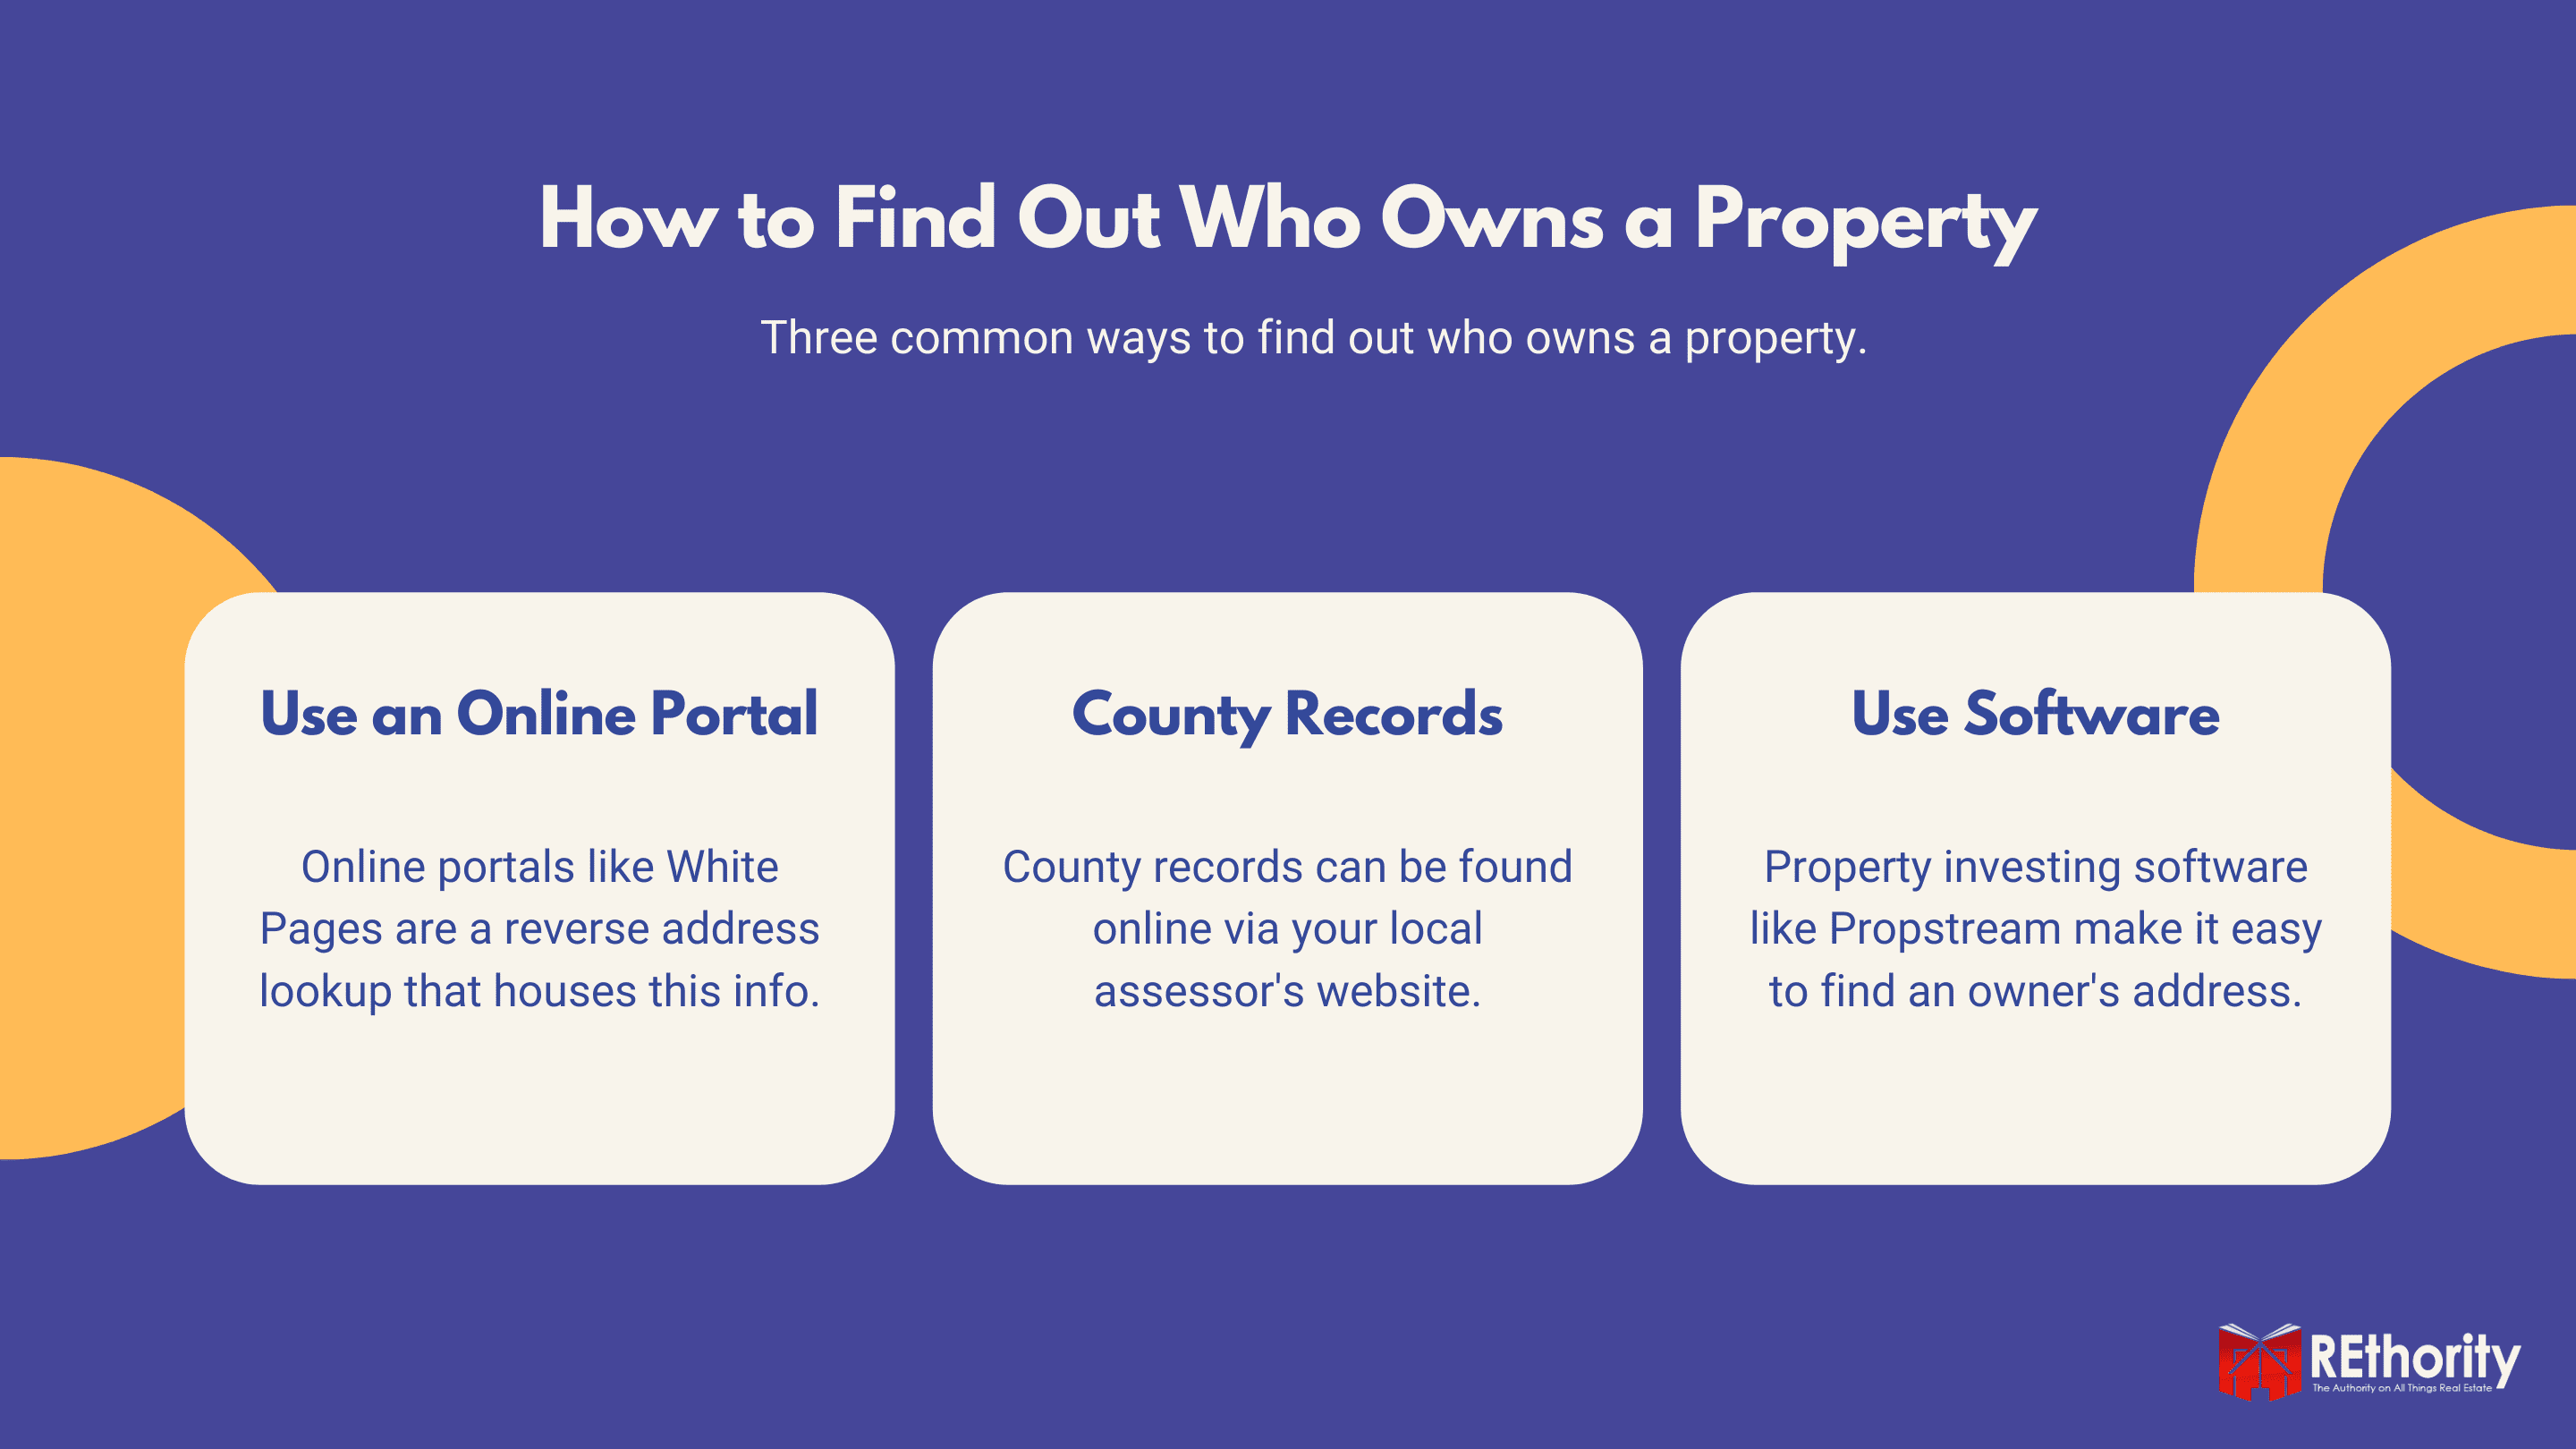 How to Find Out Who Owns a Property graphic against a blue background with three separate ways to find an owner's address